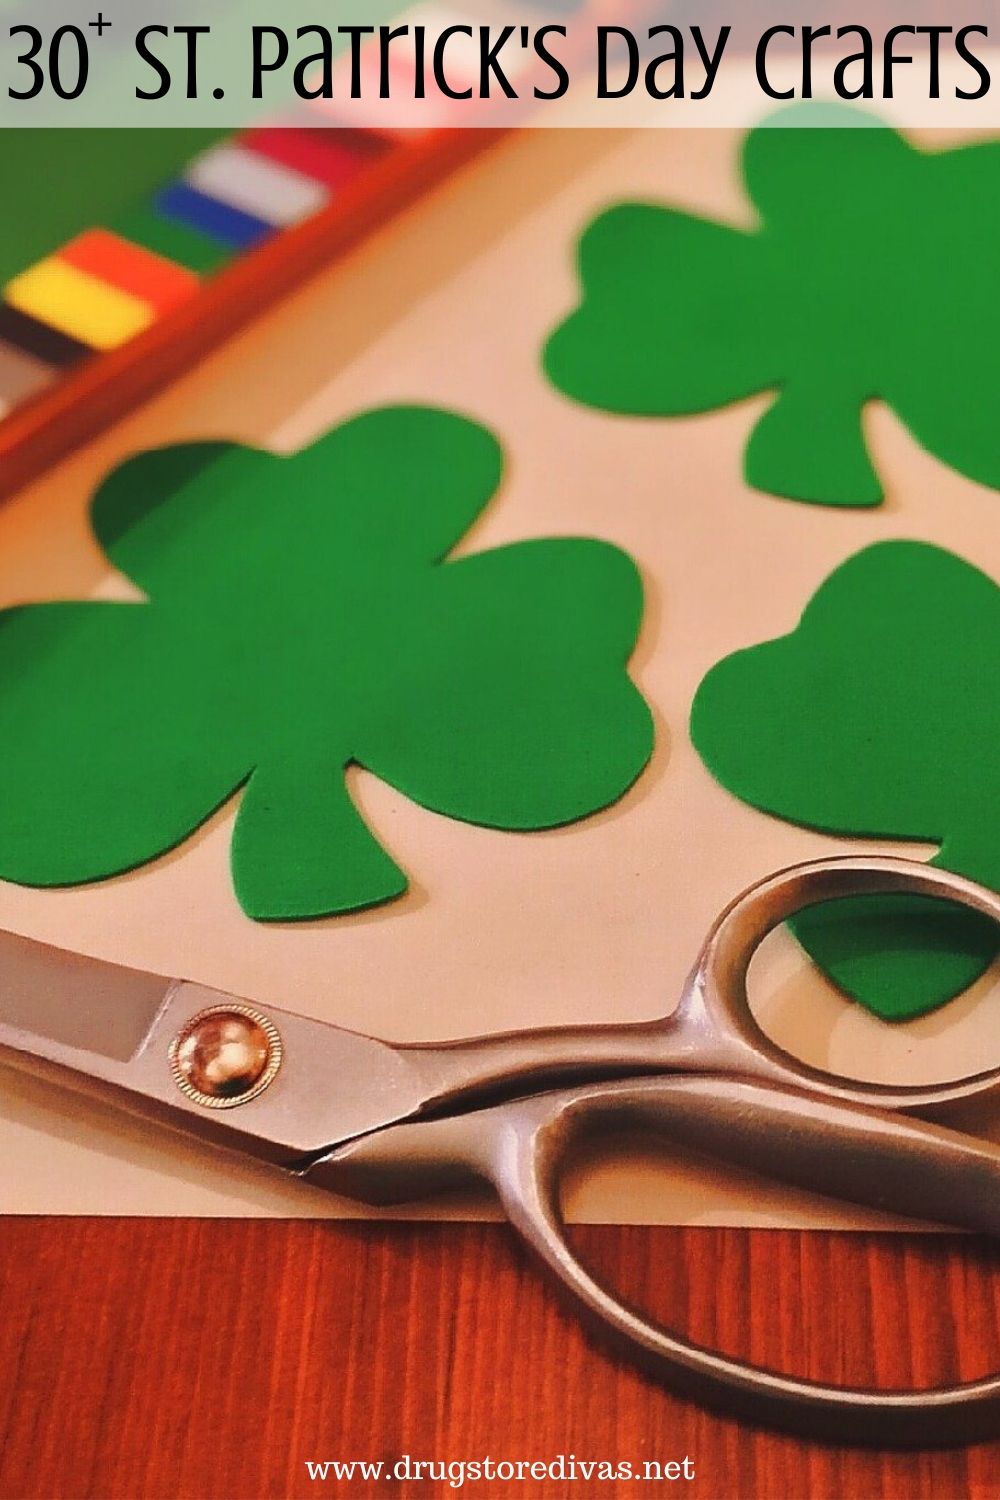 Celebrate St. Patrick's Day by making one of these 30+ St. Patrick's Day Crafts on www.drugstoredivas.net.